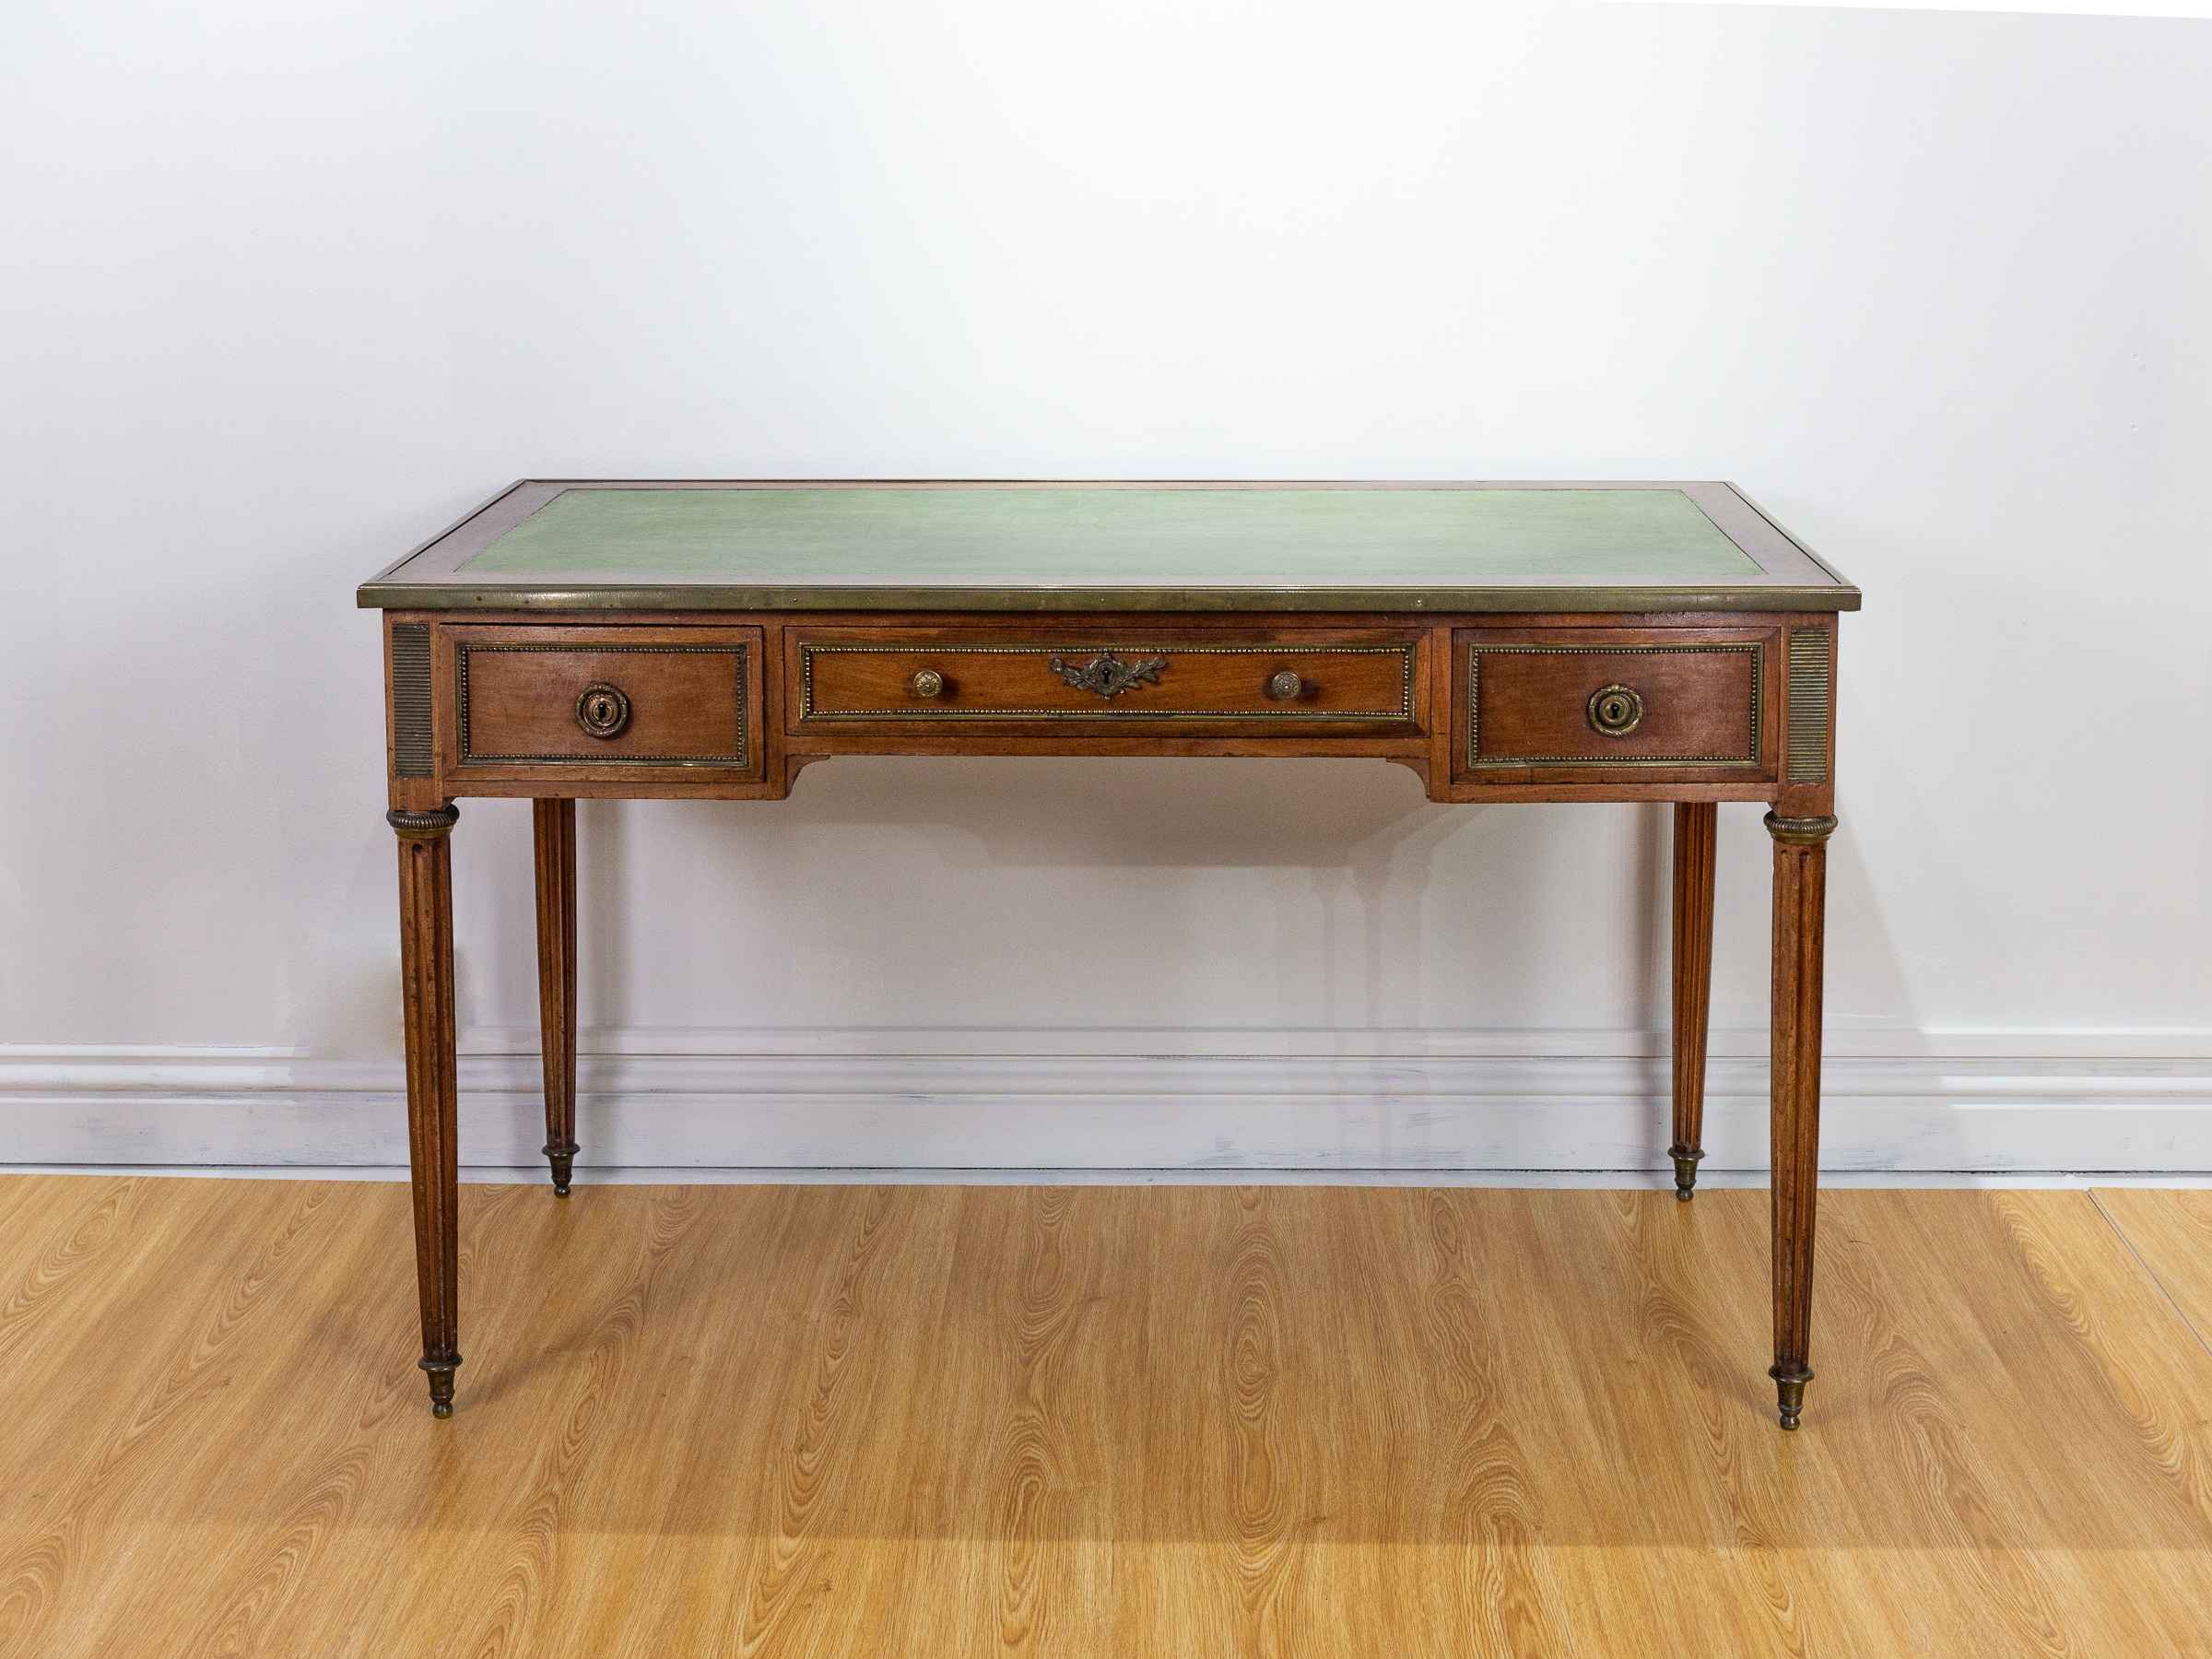 19th Century French bureau. Antique mahogany bureau with green leather top and bronze inlay trim and 3 drawers. In excellent condition.